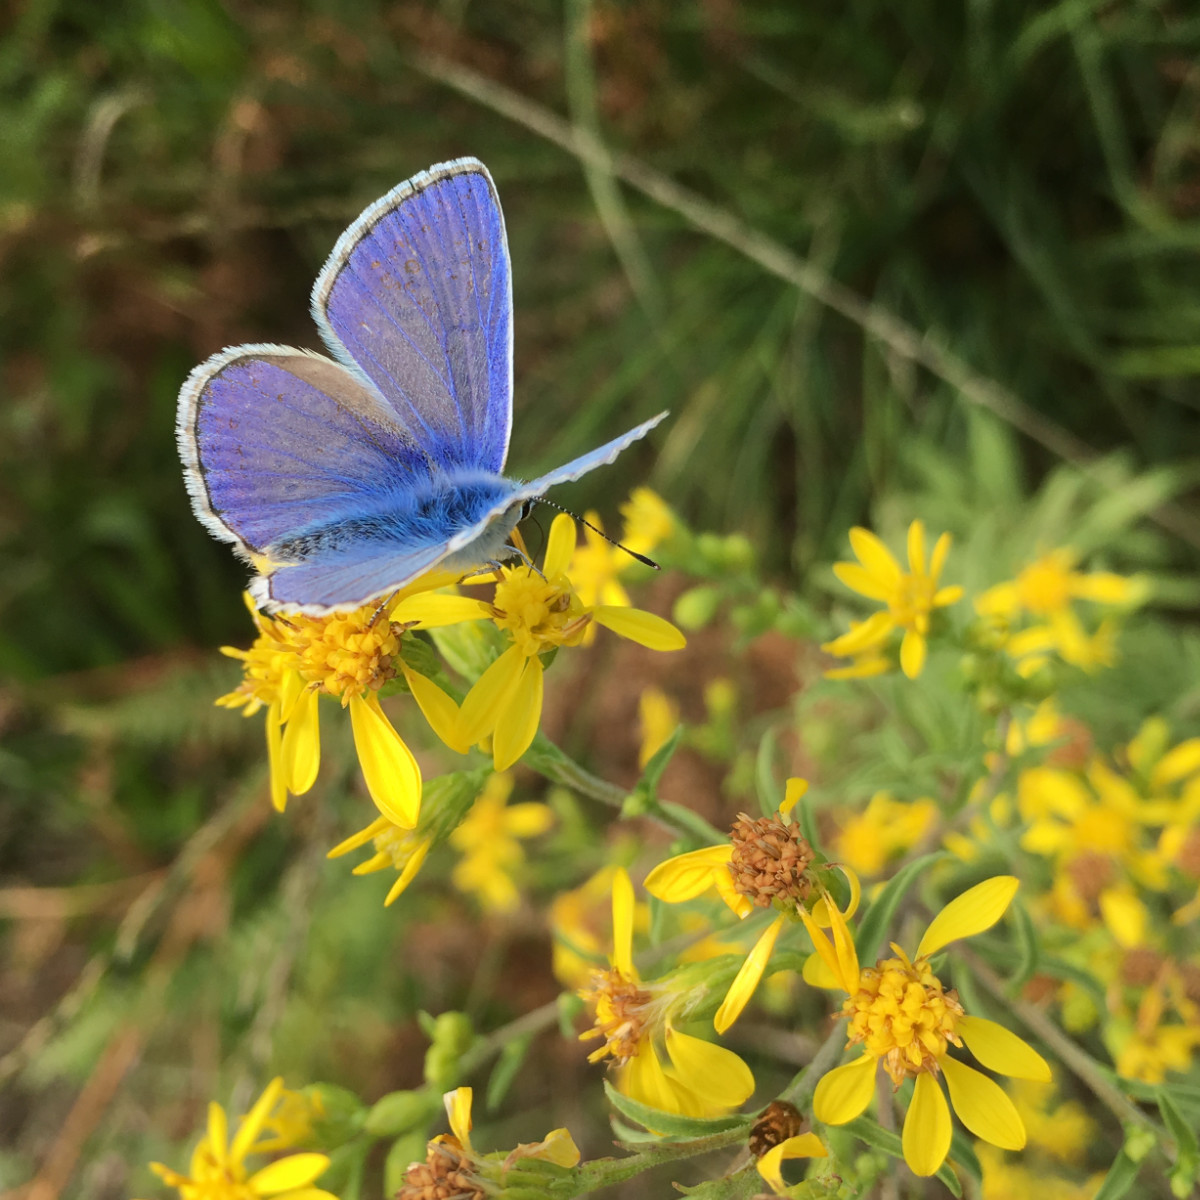 A blue butterfly resting on bright yellow flowers